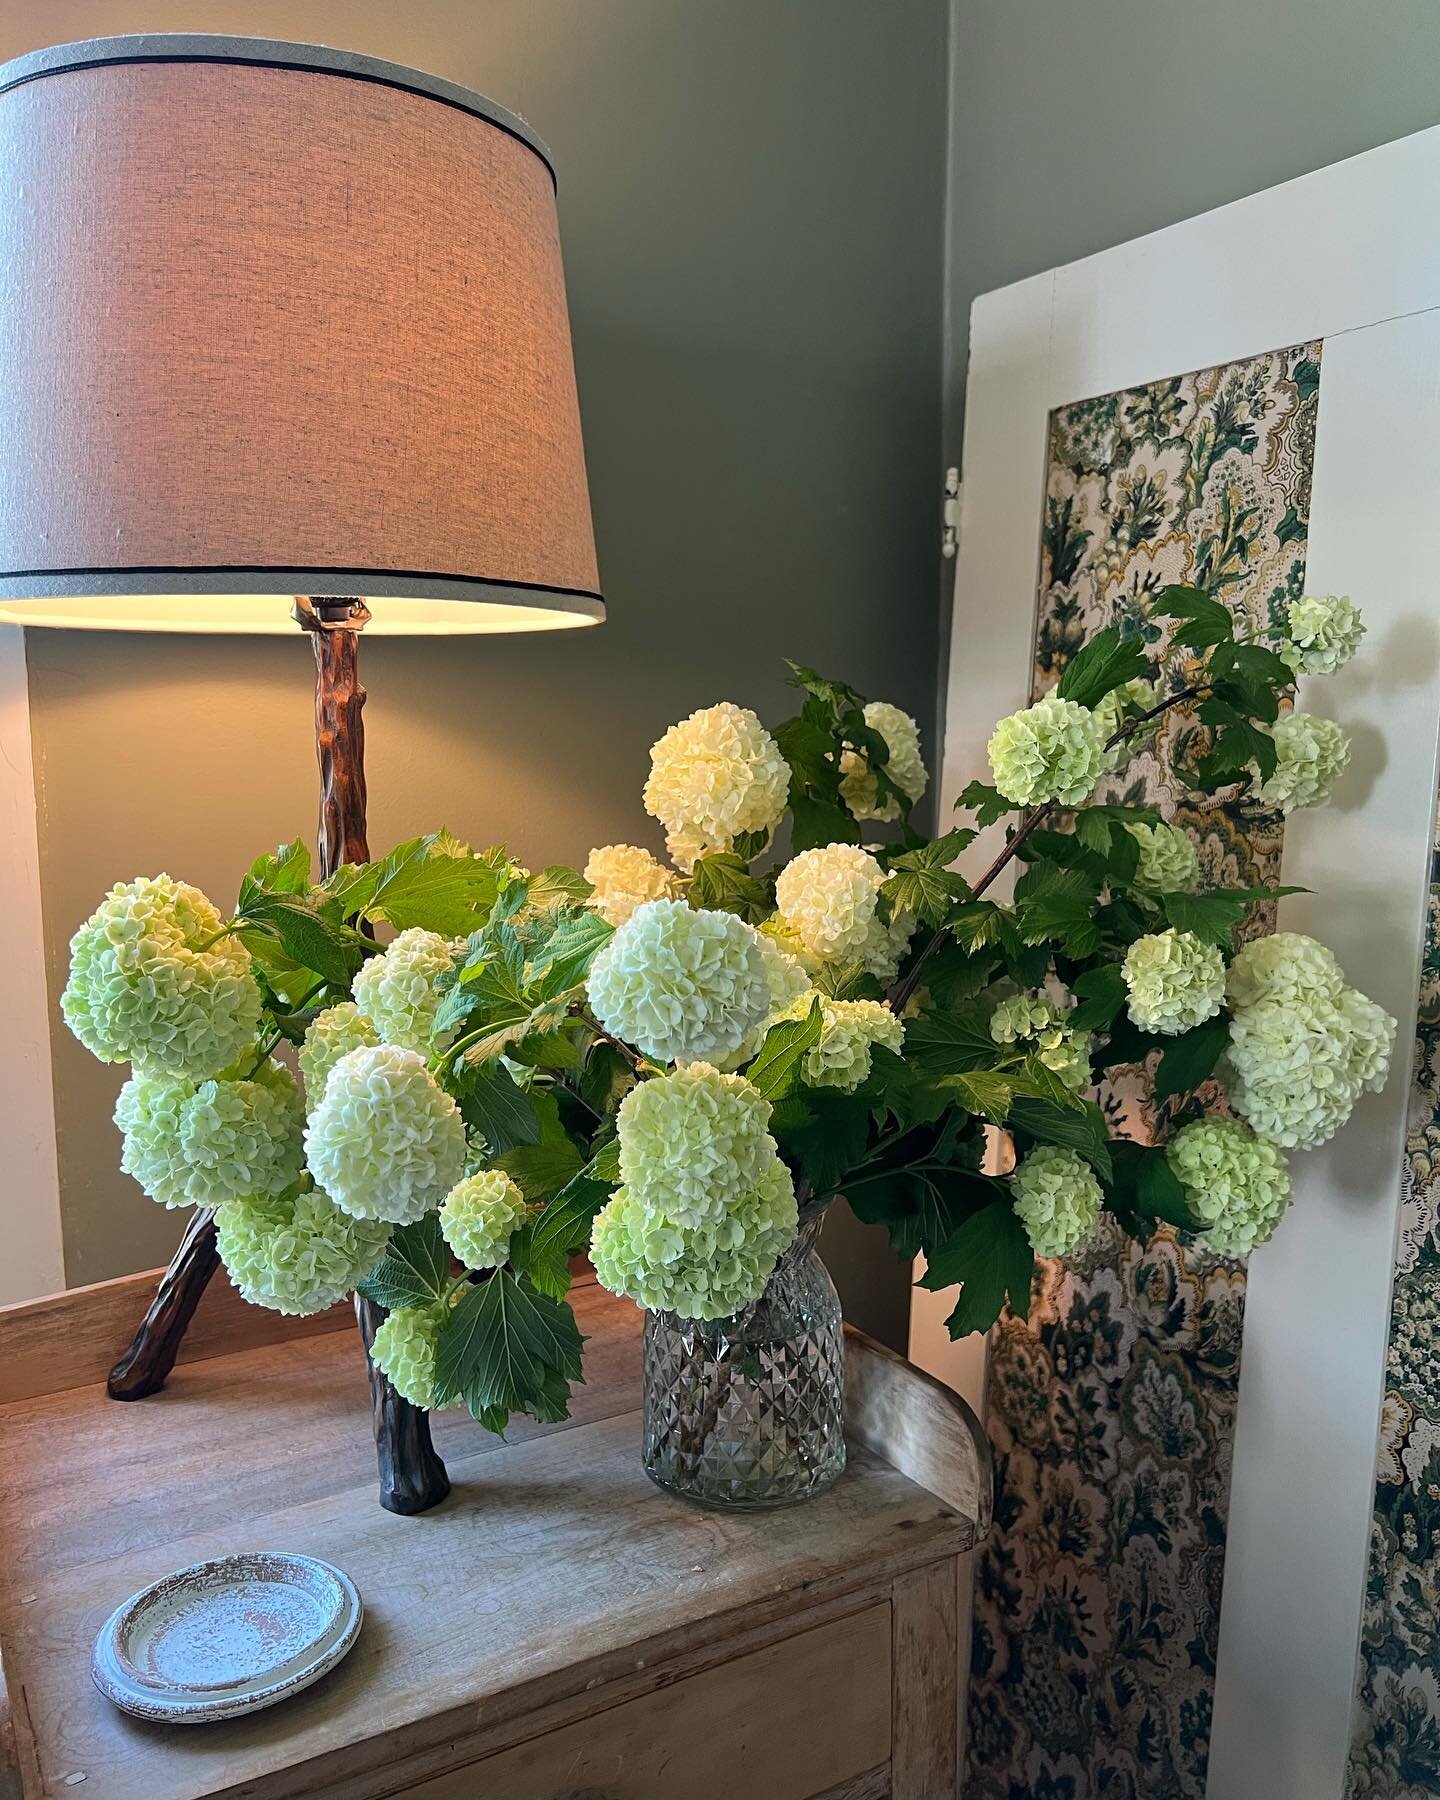 That snowball viburnam 😍😍 my mom planted it at least 20 years ago &amp; every season I cut it early when it&rsquo;s green &amp; then later when it turns white. One of my favorite flowers when it&rsquo;s green &amp; @notsoflatware doesn&rsquo;t unde